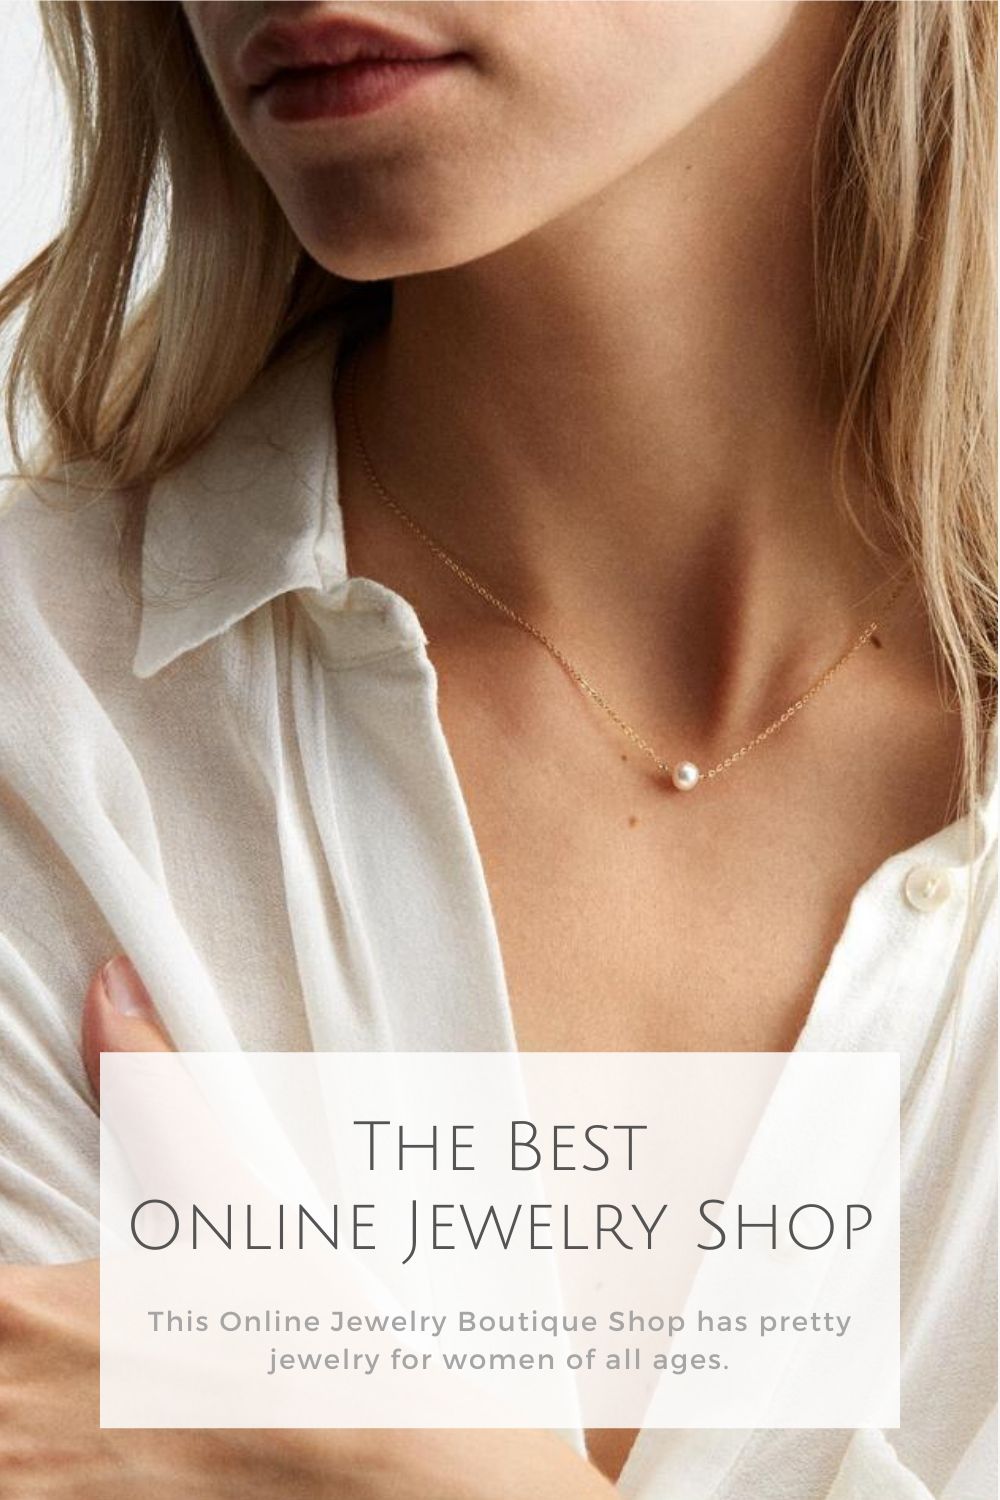 online jewelry boutique shop pin